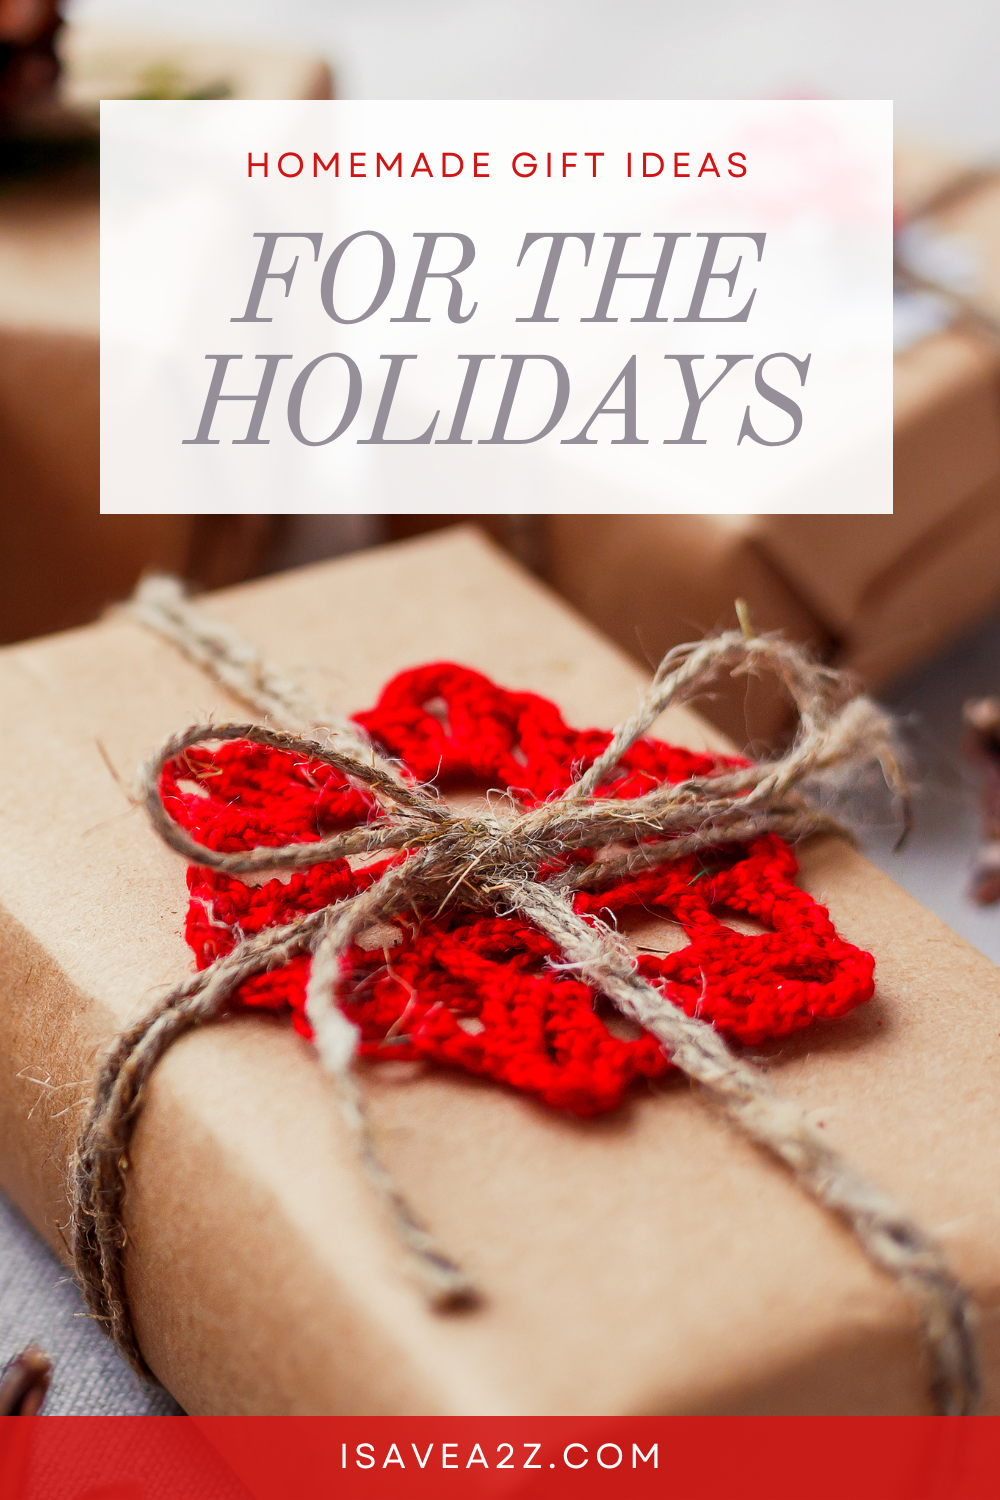 Top Homemade Gift Ideas For The Holidays